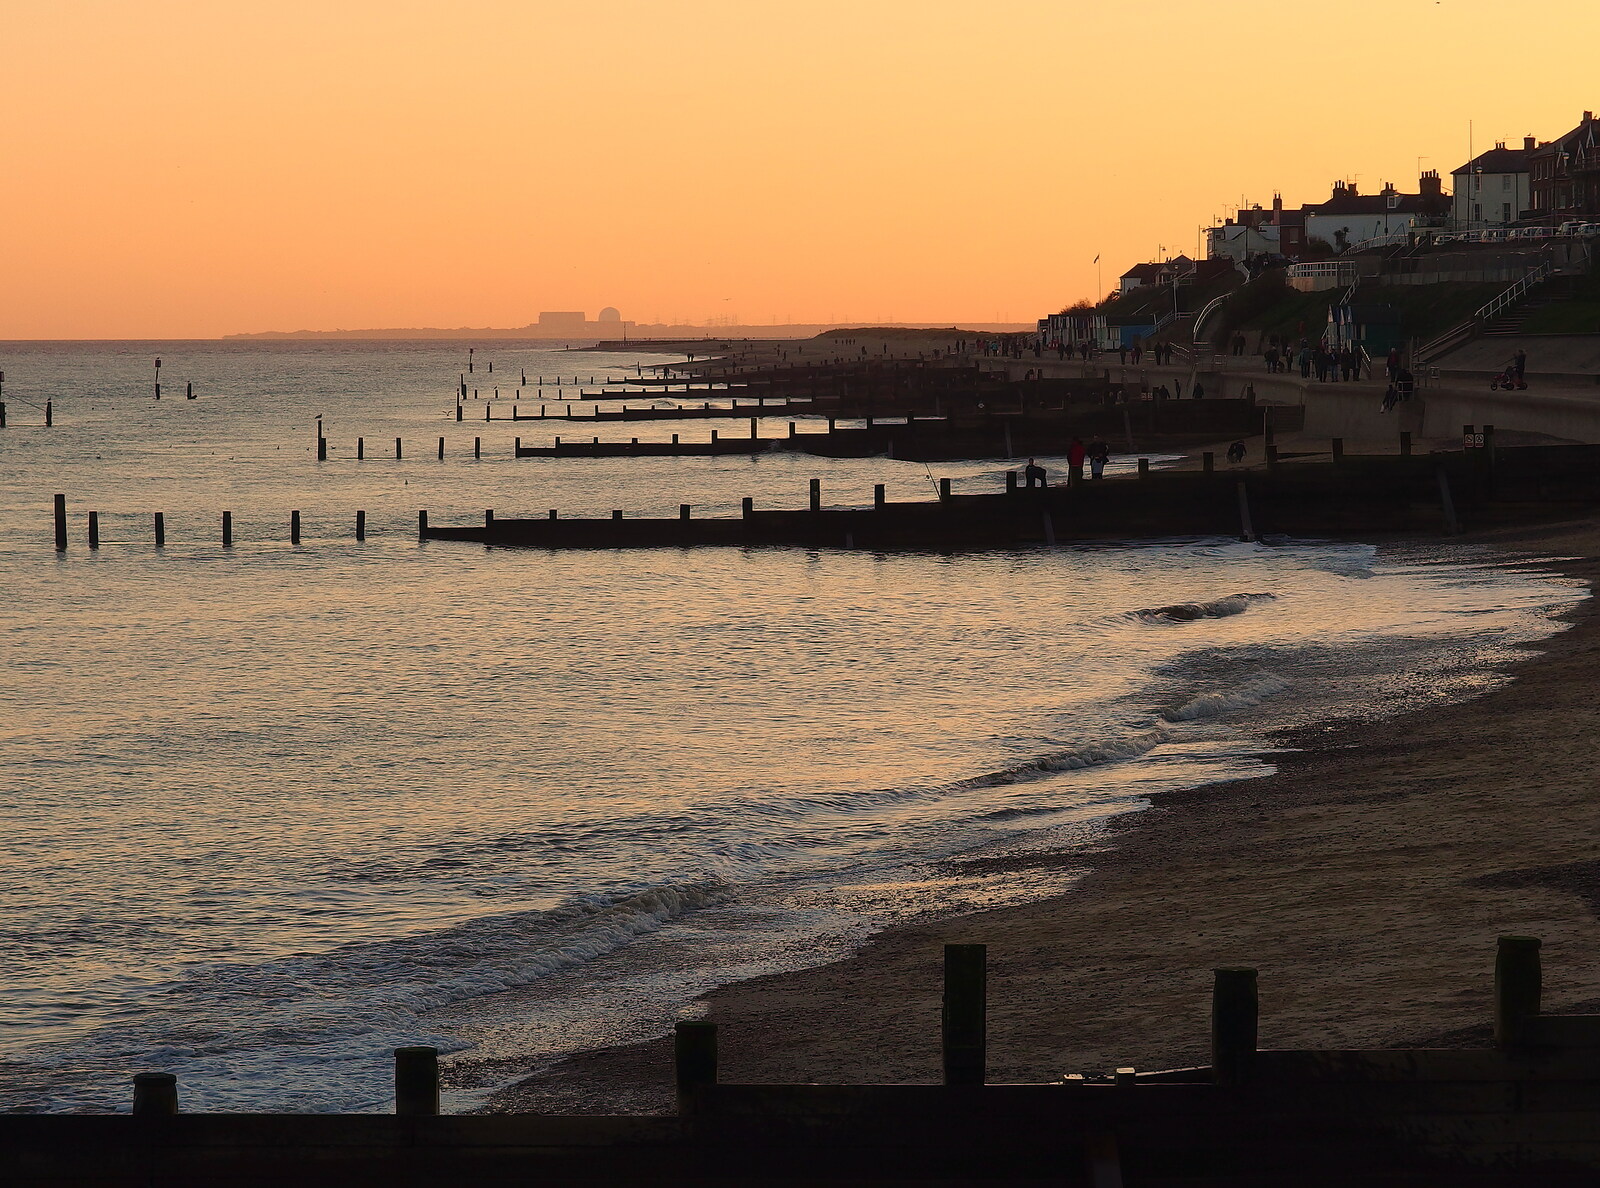 Sizewell and groynes in the sunset from Post-Christmas Southwold, Suffolk - 29th December 2013